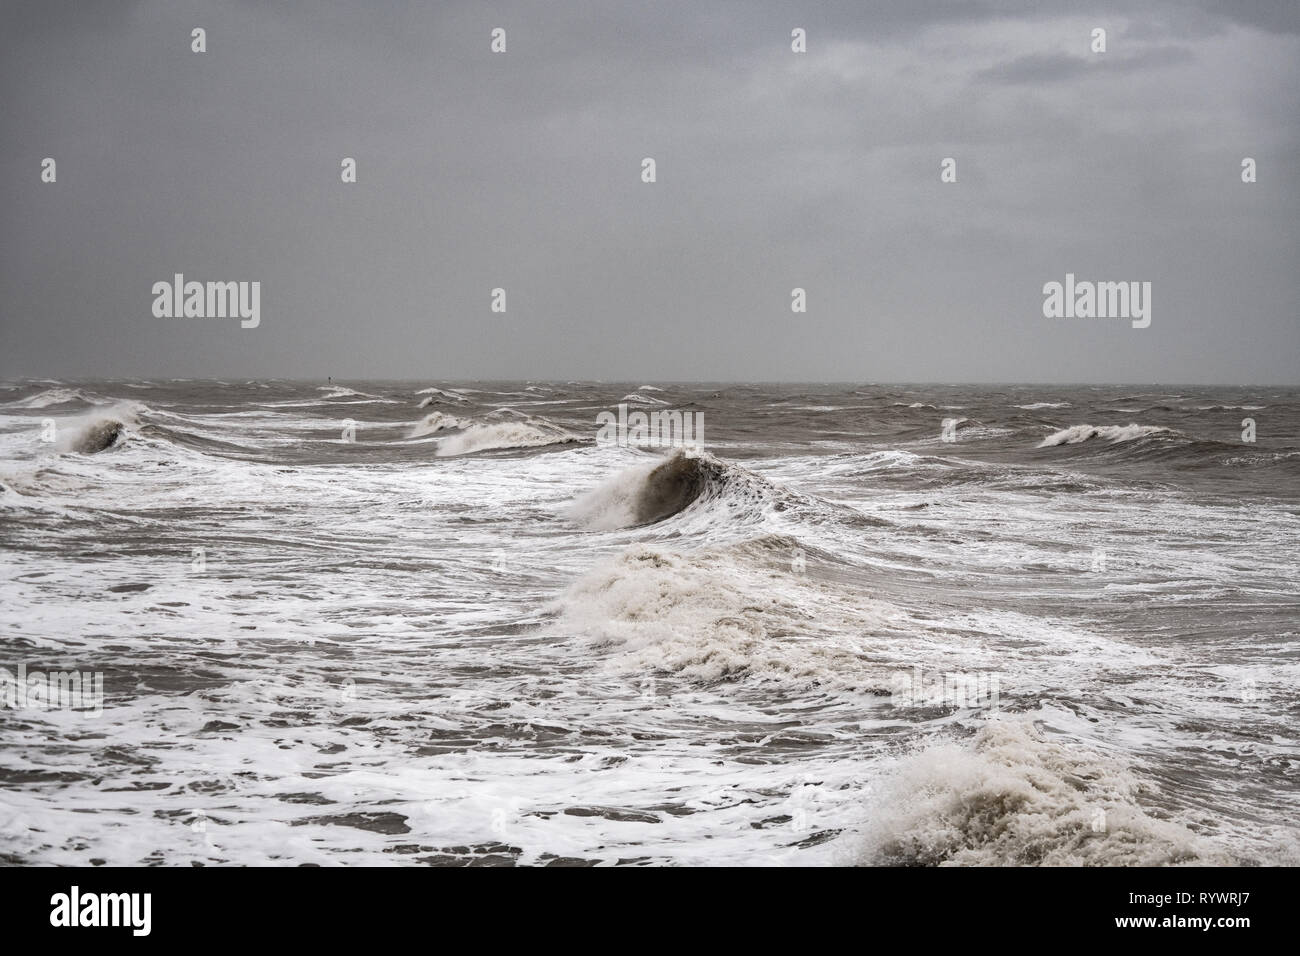 bad weather and rough seas Stock Photo